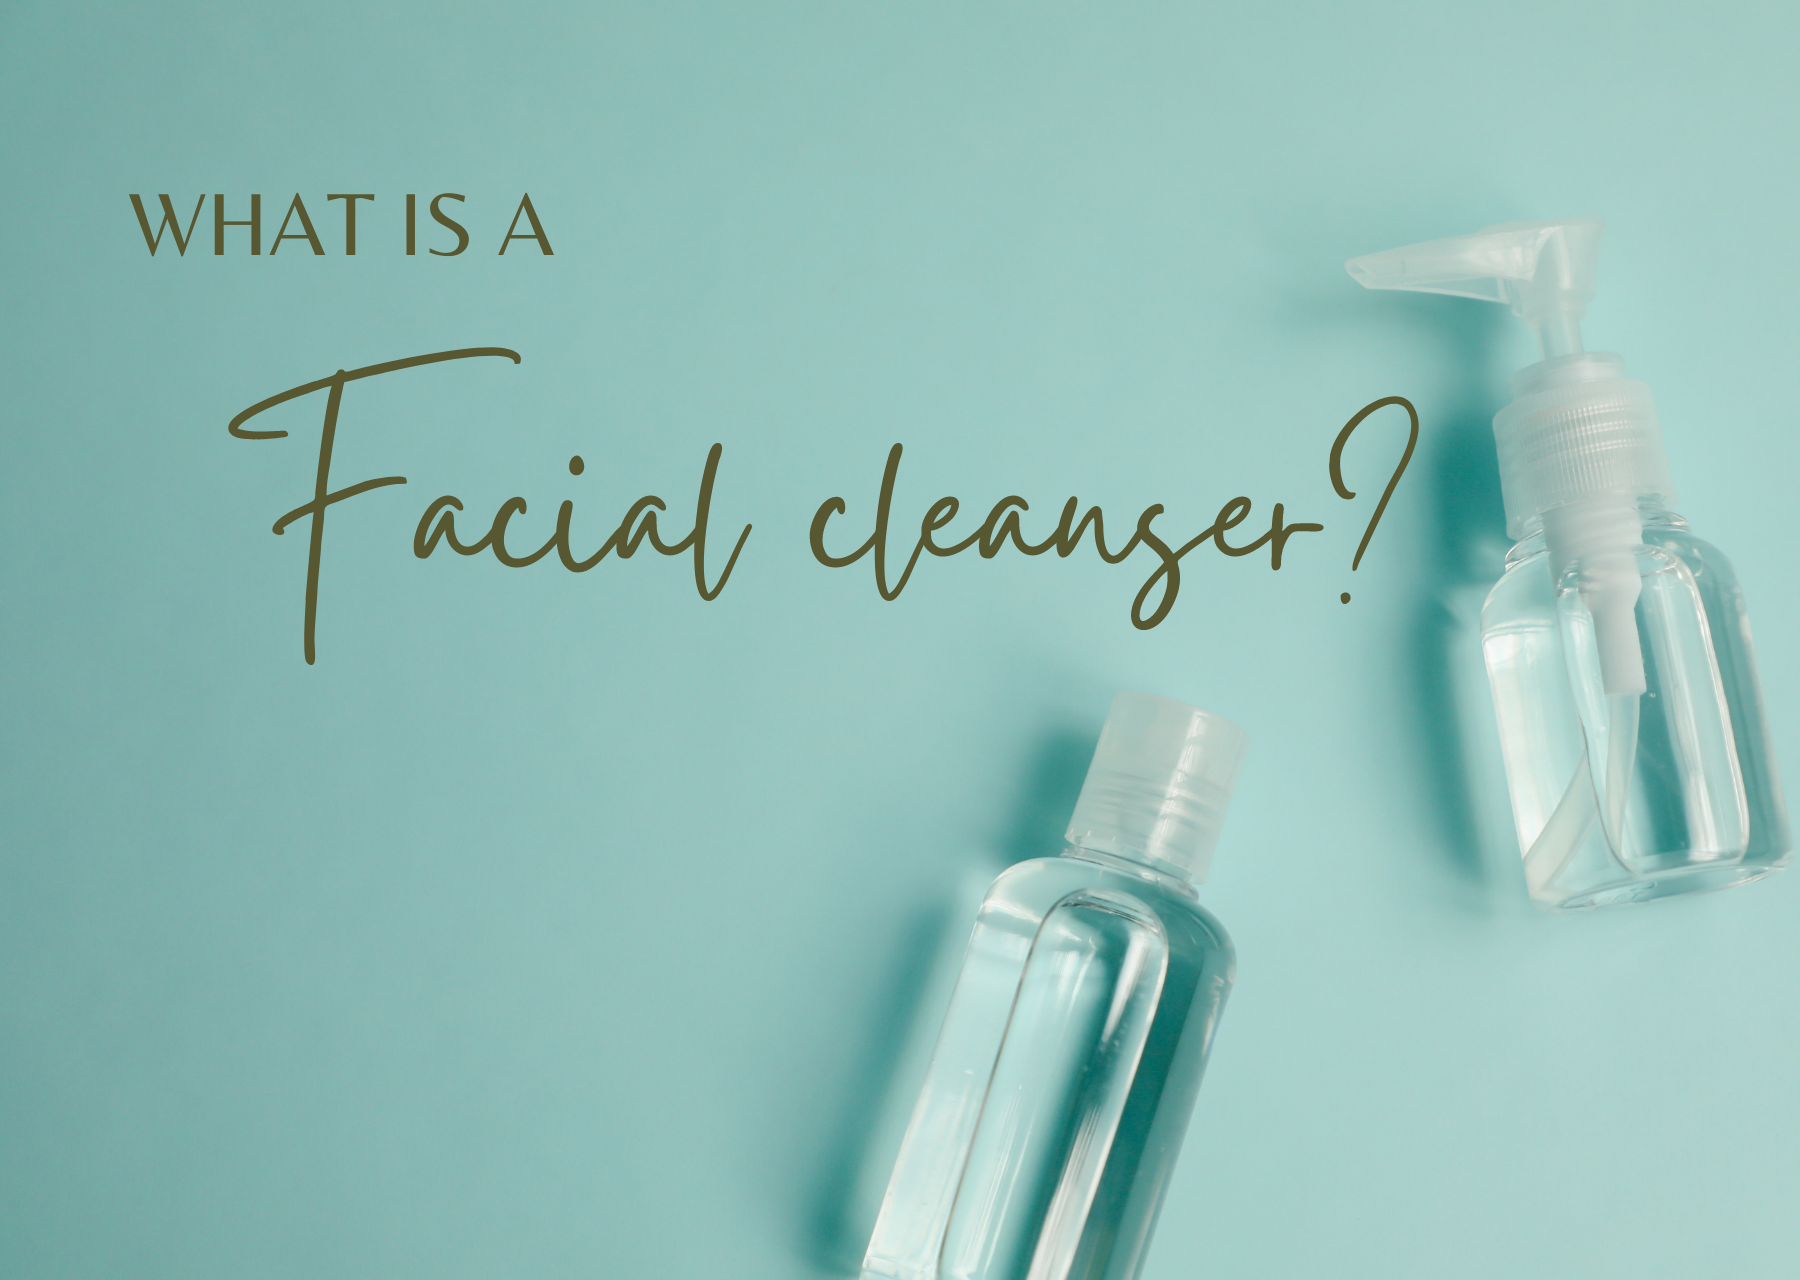 What is Facial Cleanser